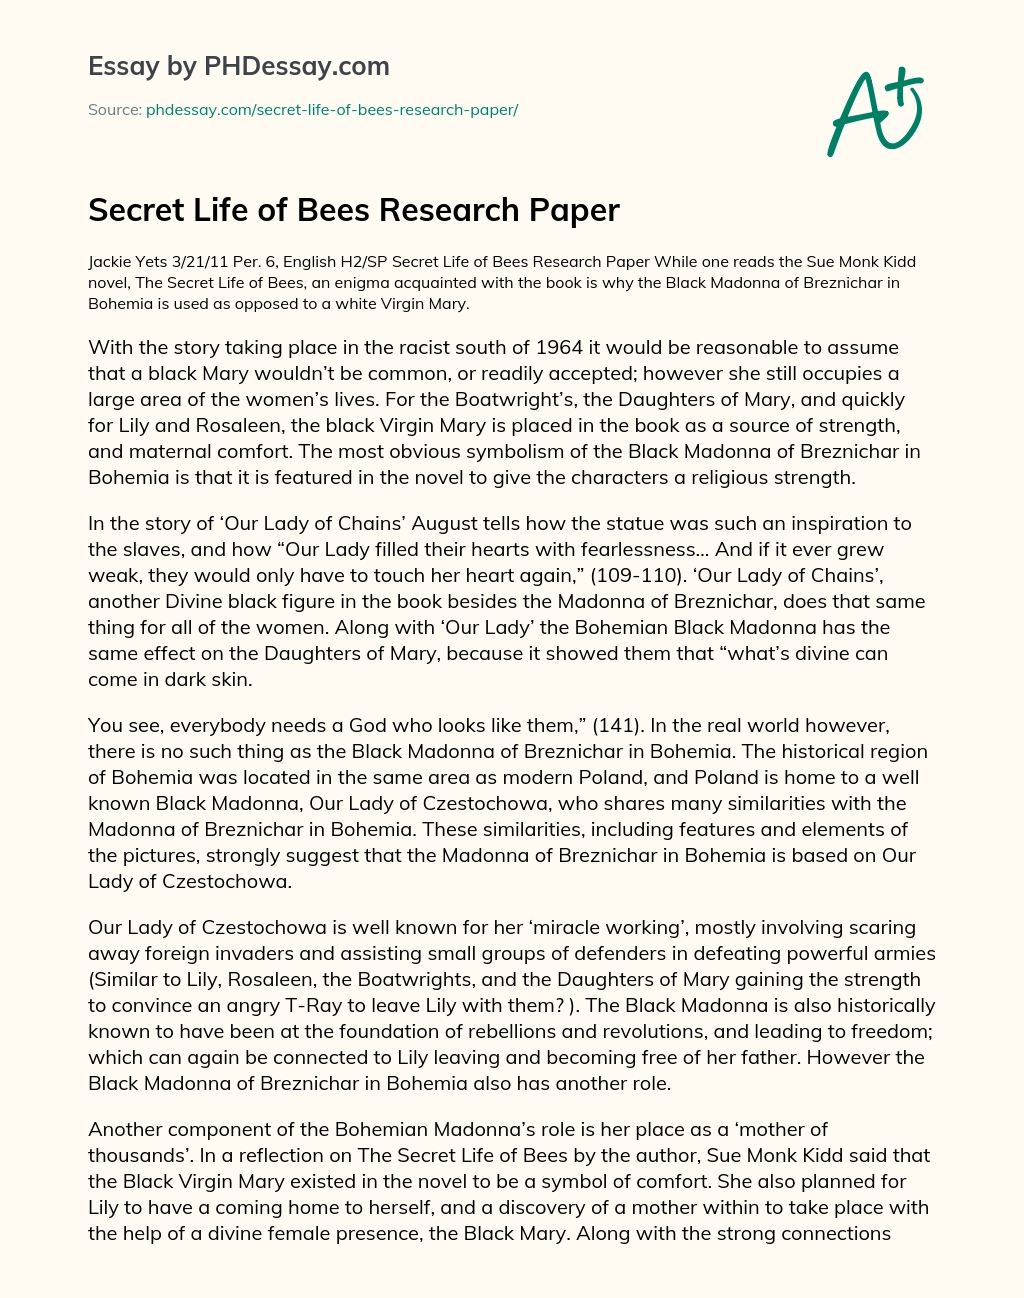 Secret Life of Bees Research Paper essay